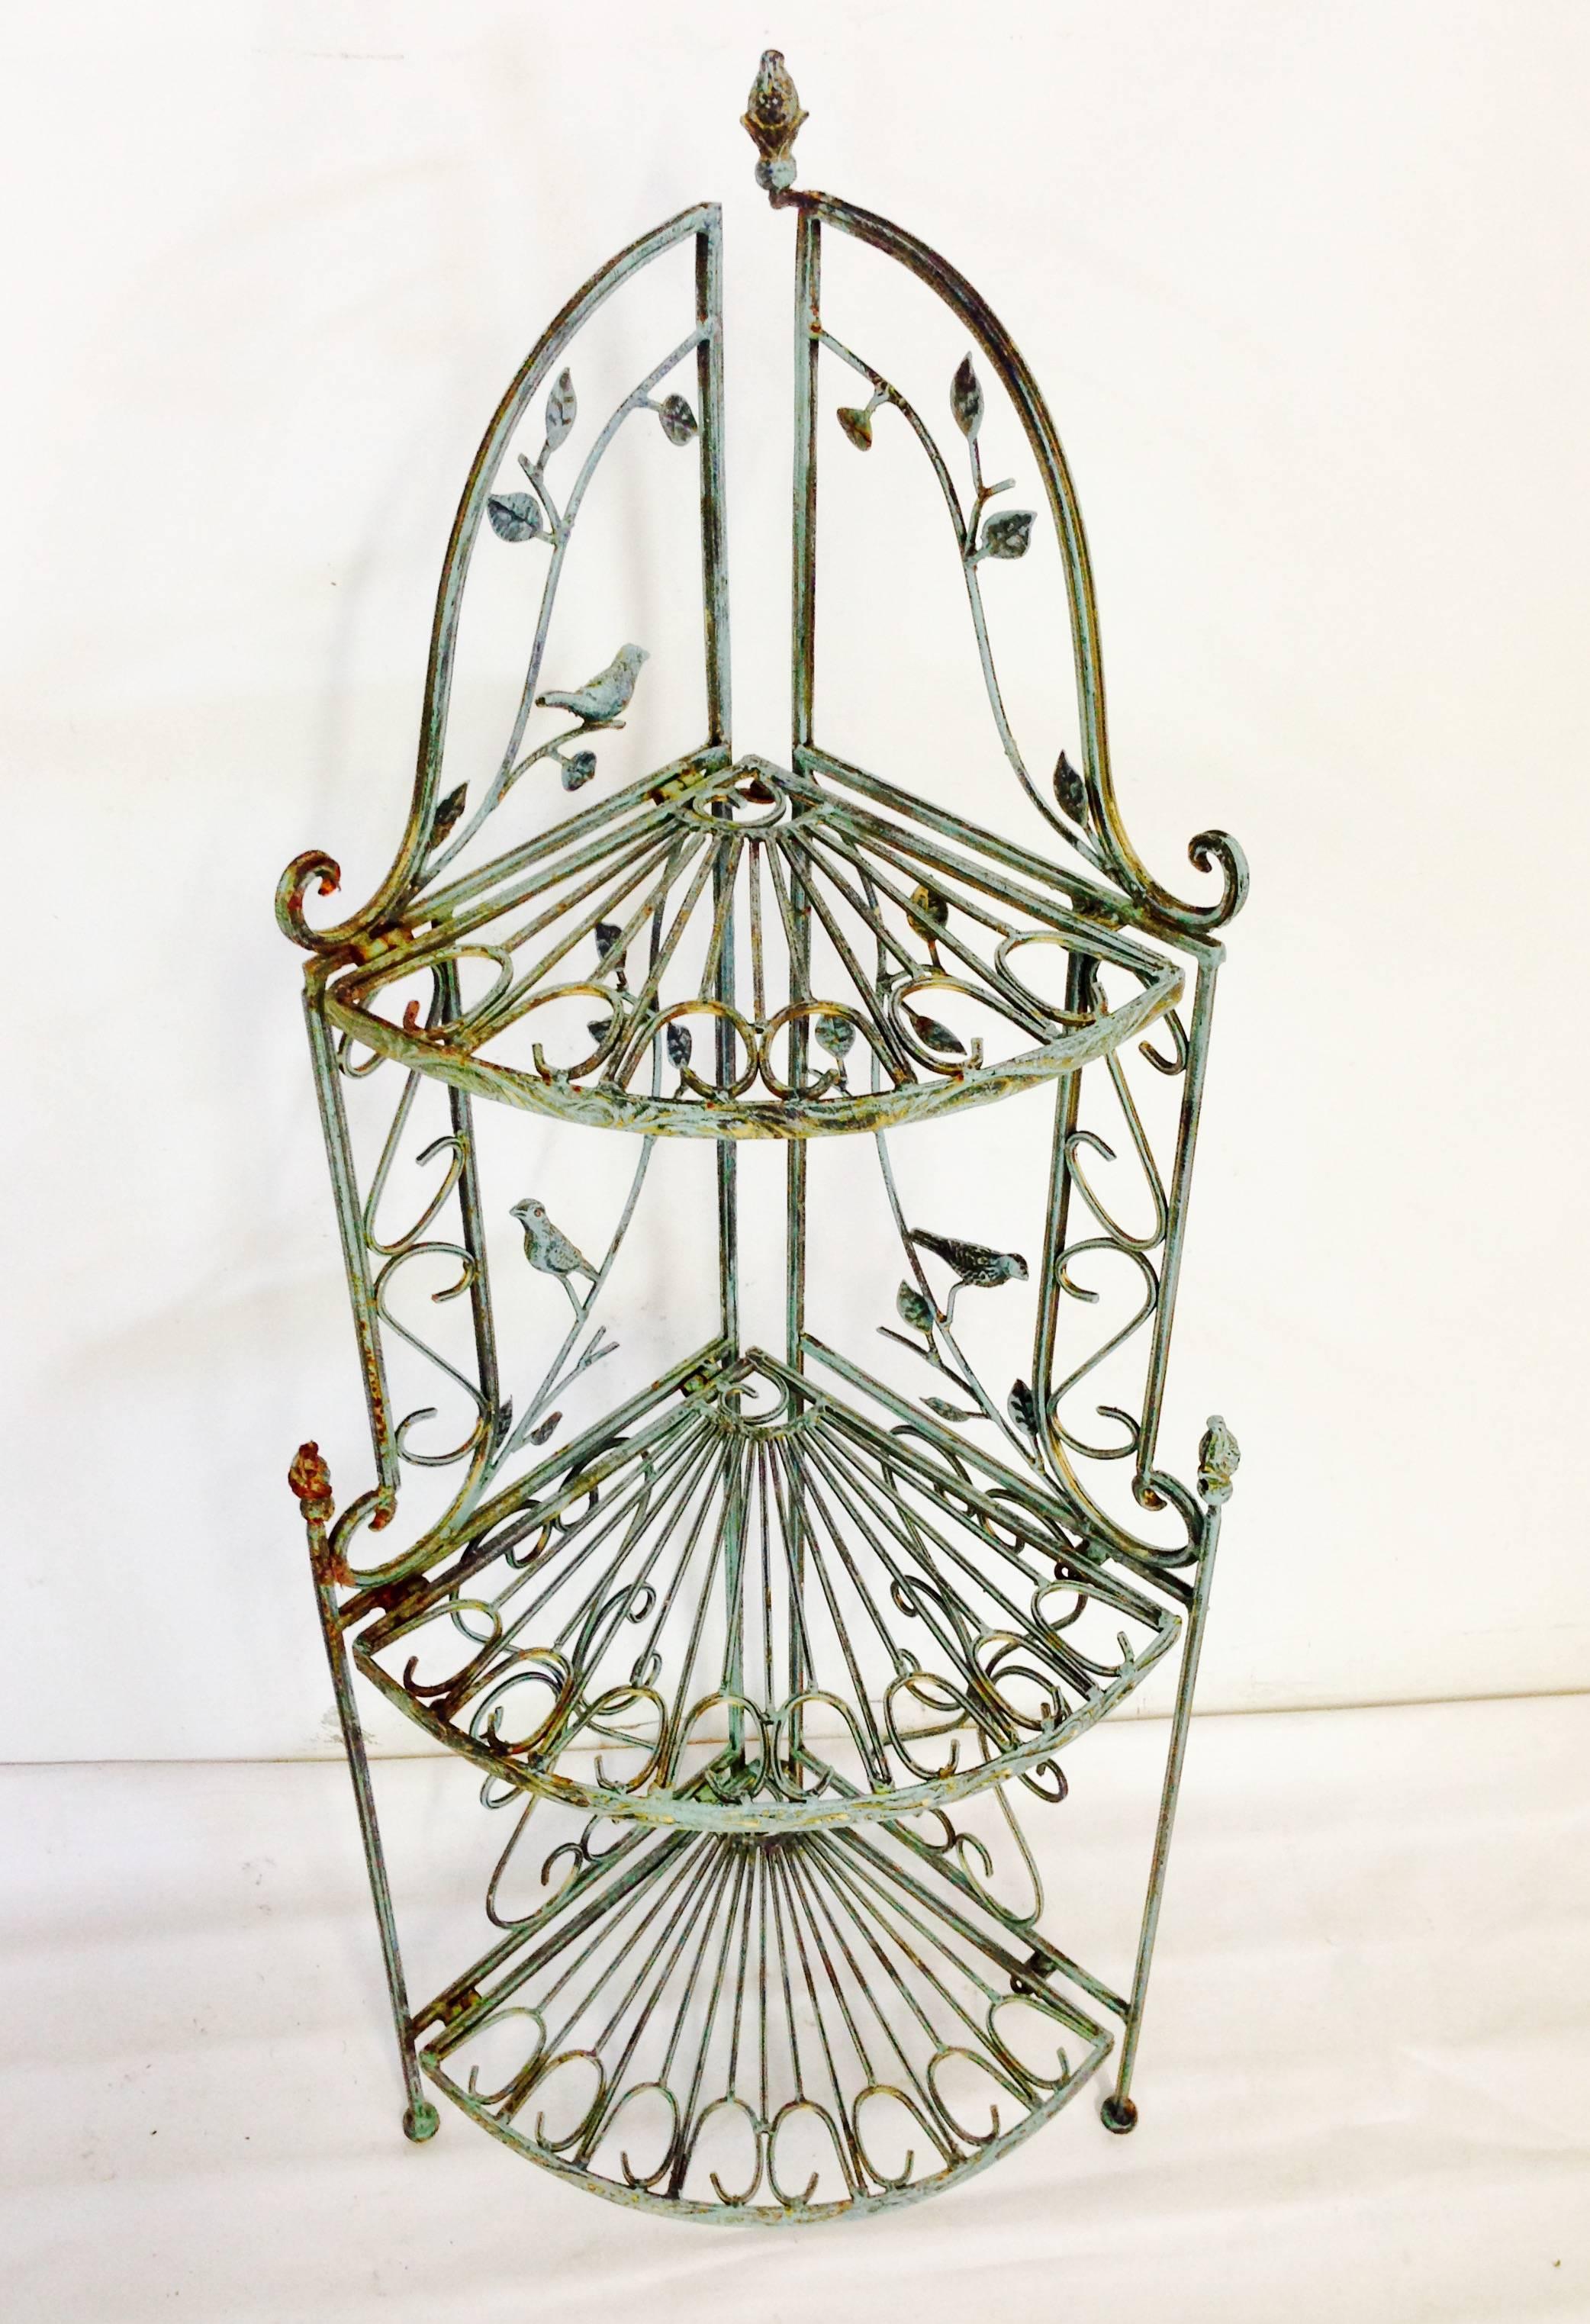 This adorable bird motif collapsible and adjustable three-tier shelf is iron painted in a verdigris green finish. Scroll and branch detail, each shelf is a different dimension and curved to fit in a corner and or float. Can be used indoors or